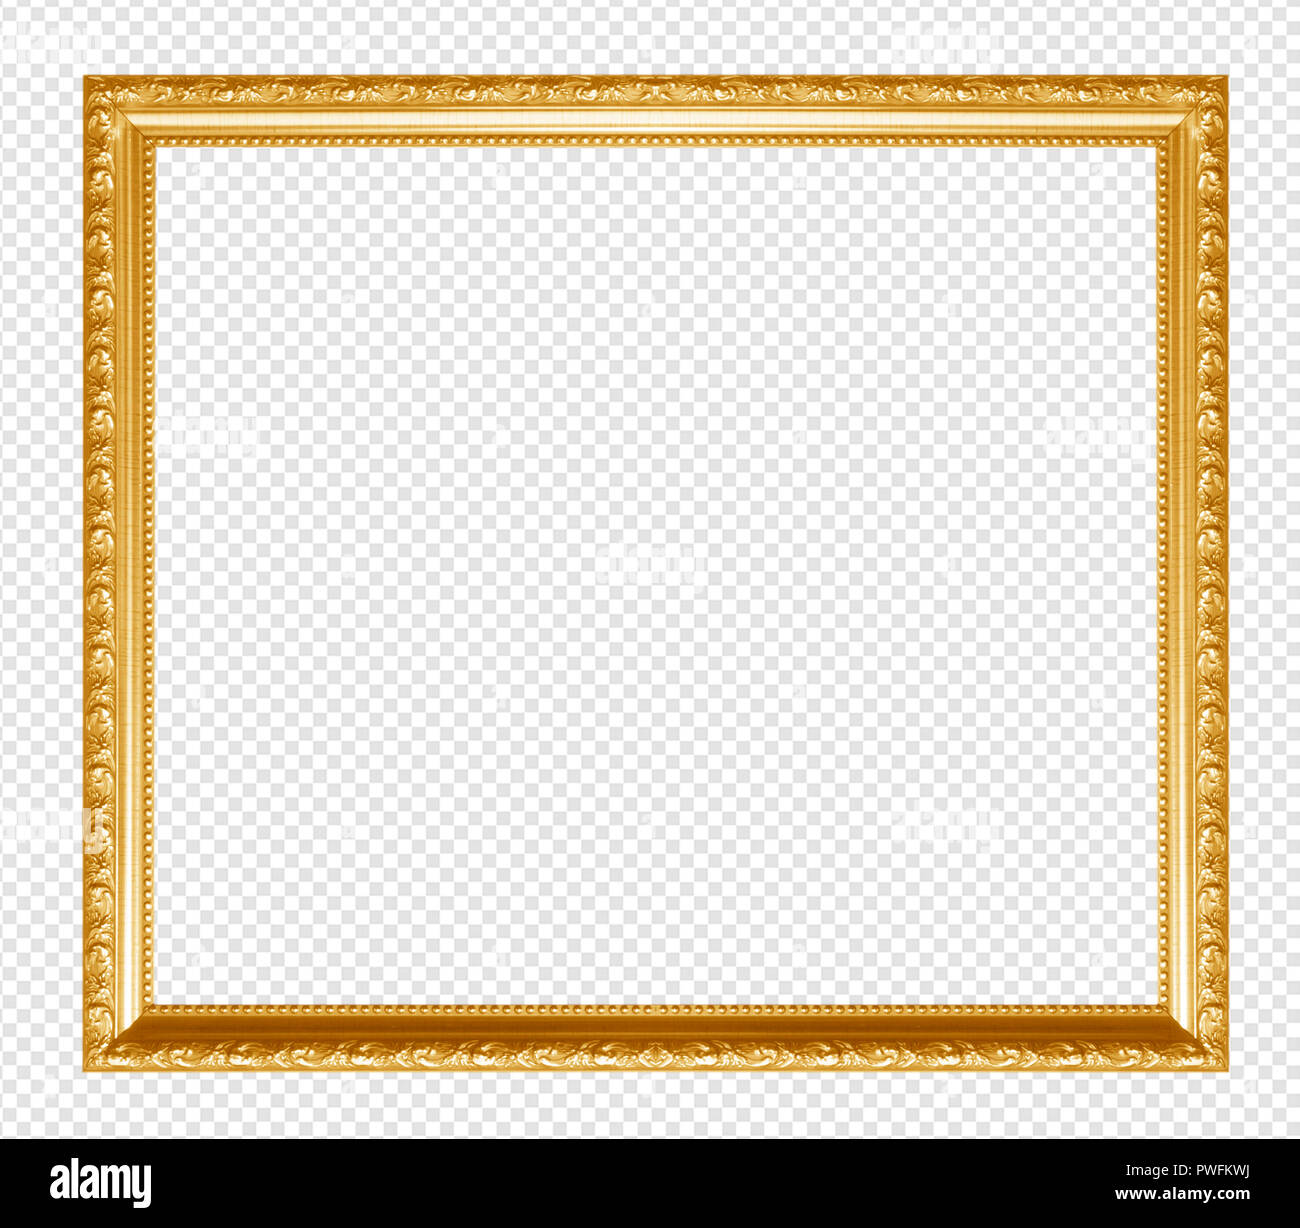 Golden wooden frame isolated on transparent background. Stock Photo